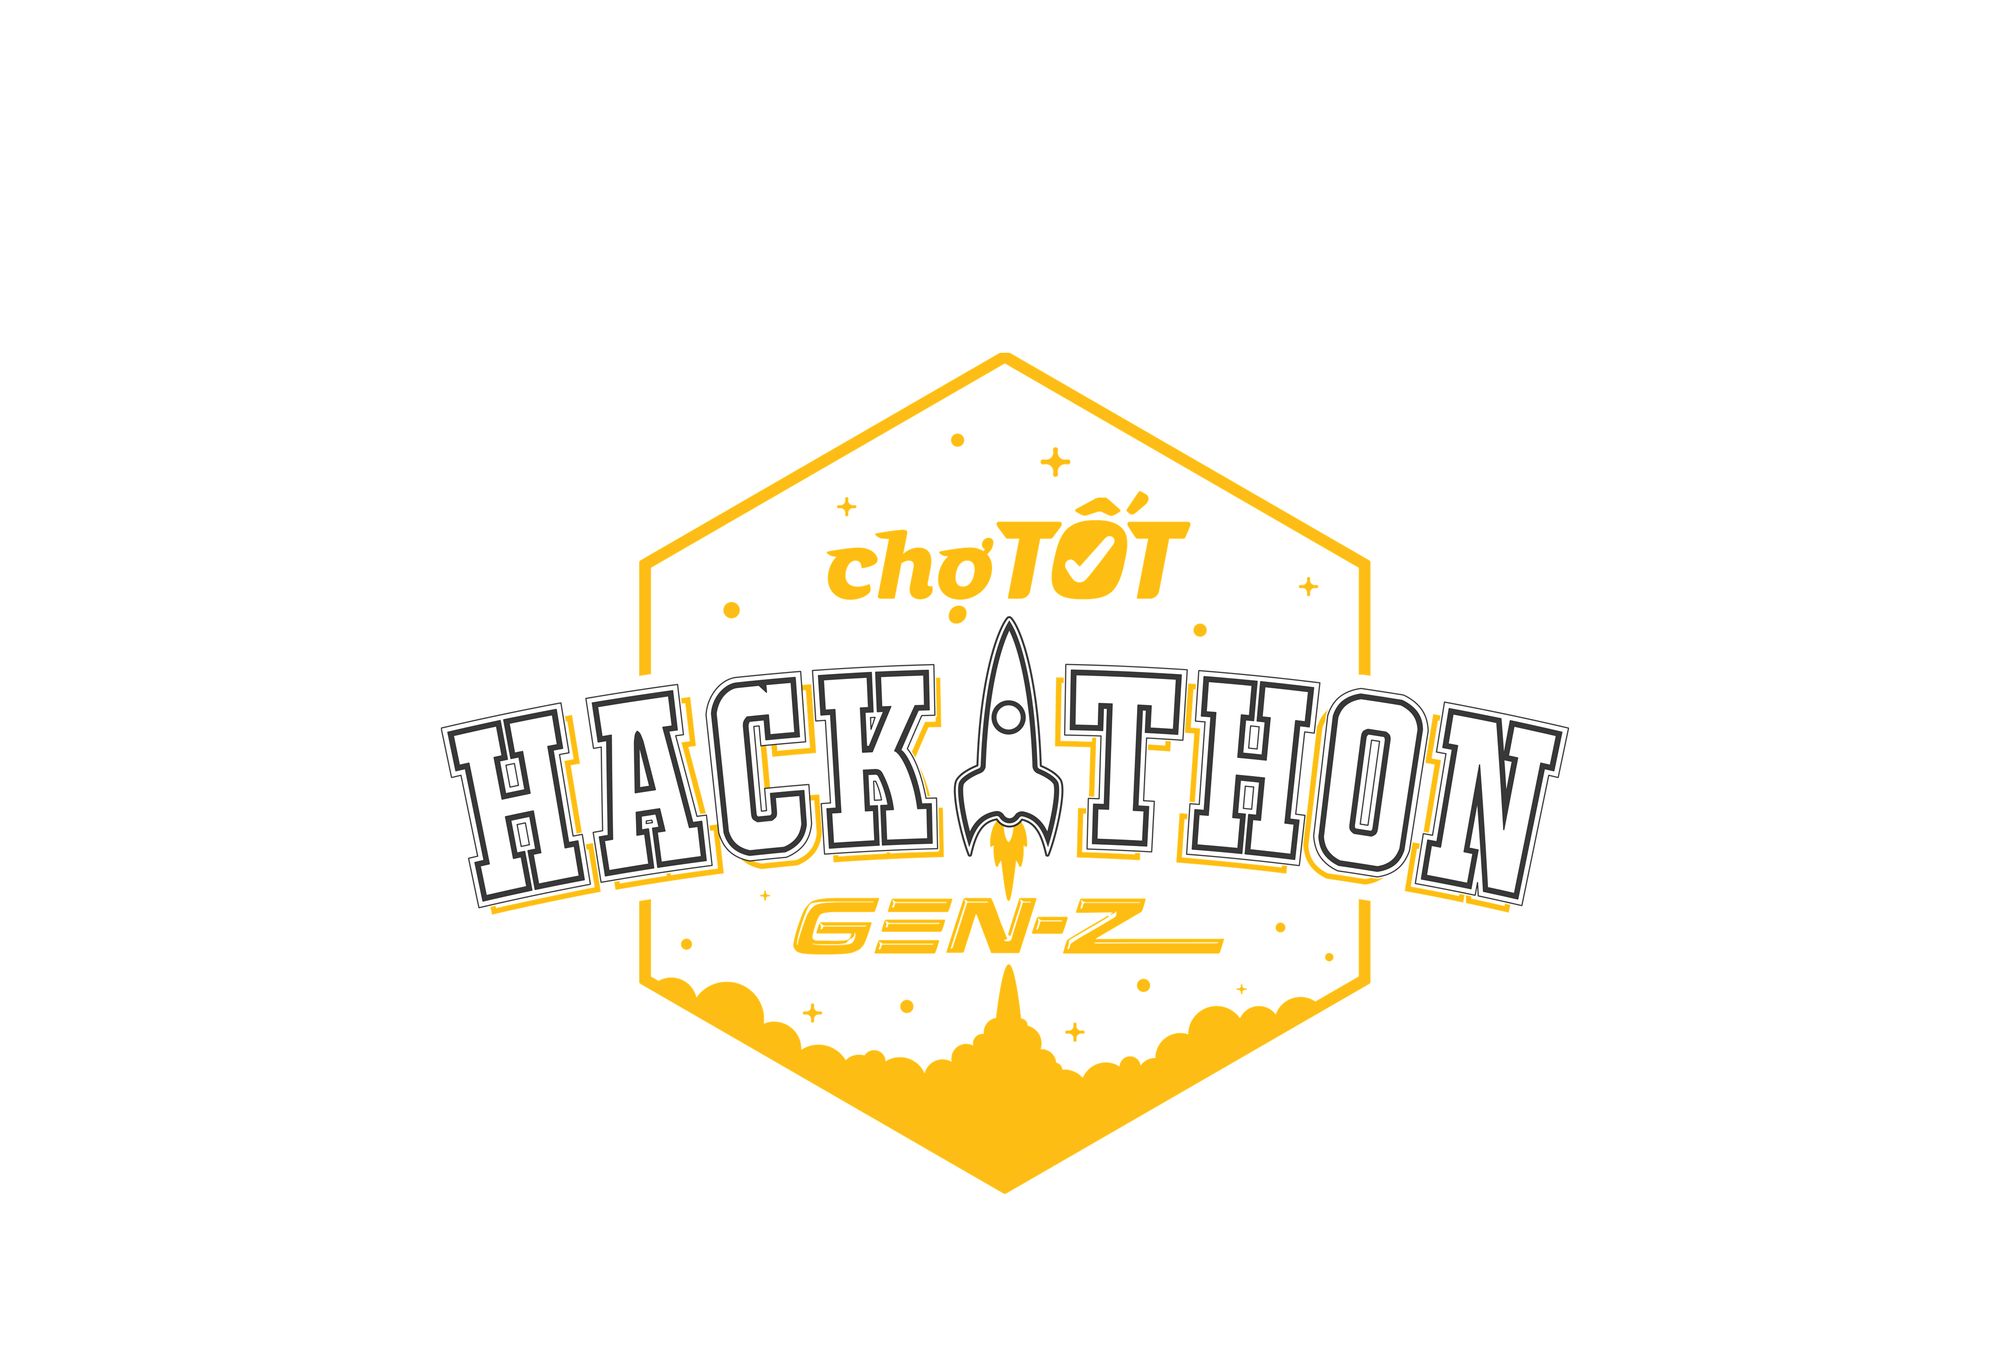 “Make Chotot tuyet for Gen Z” Hackathon – We can build a product in roughly 36 hours!